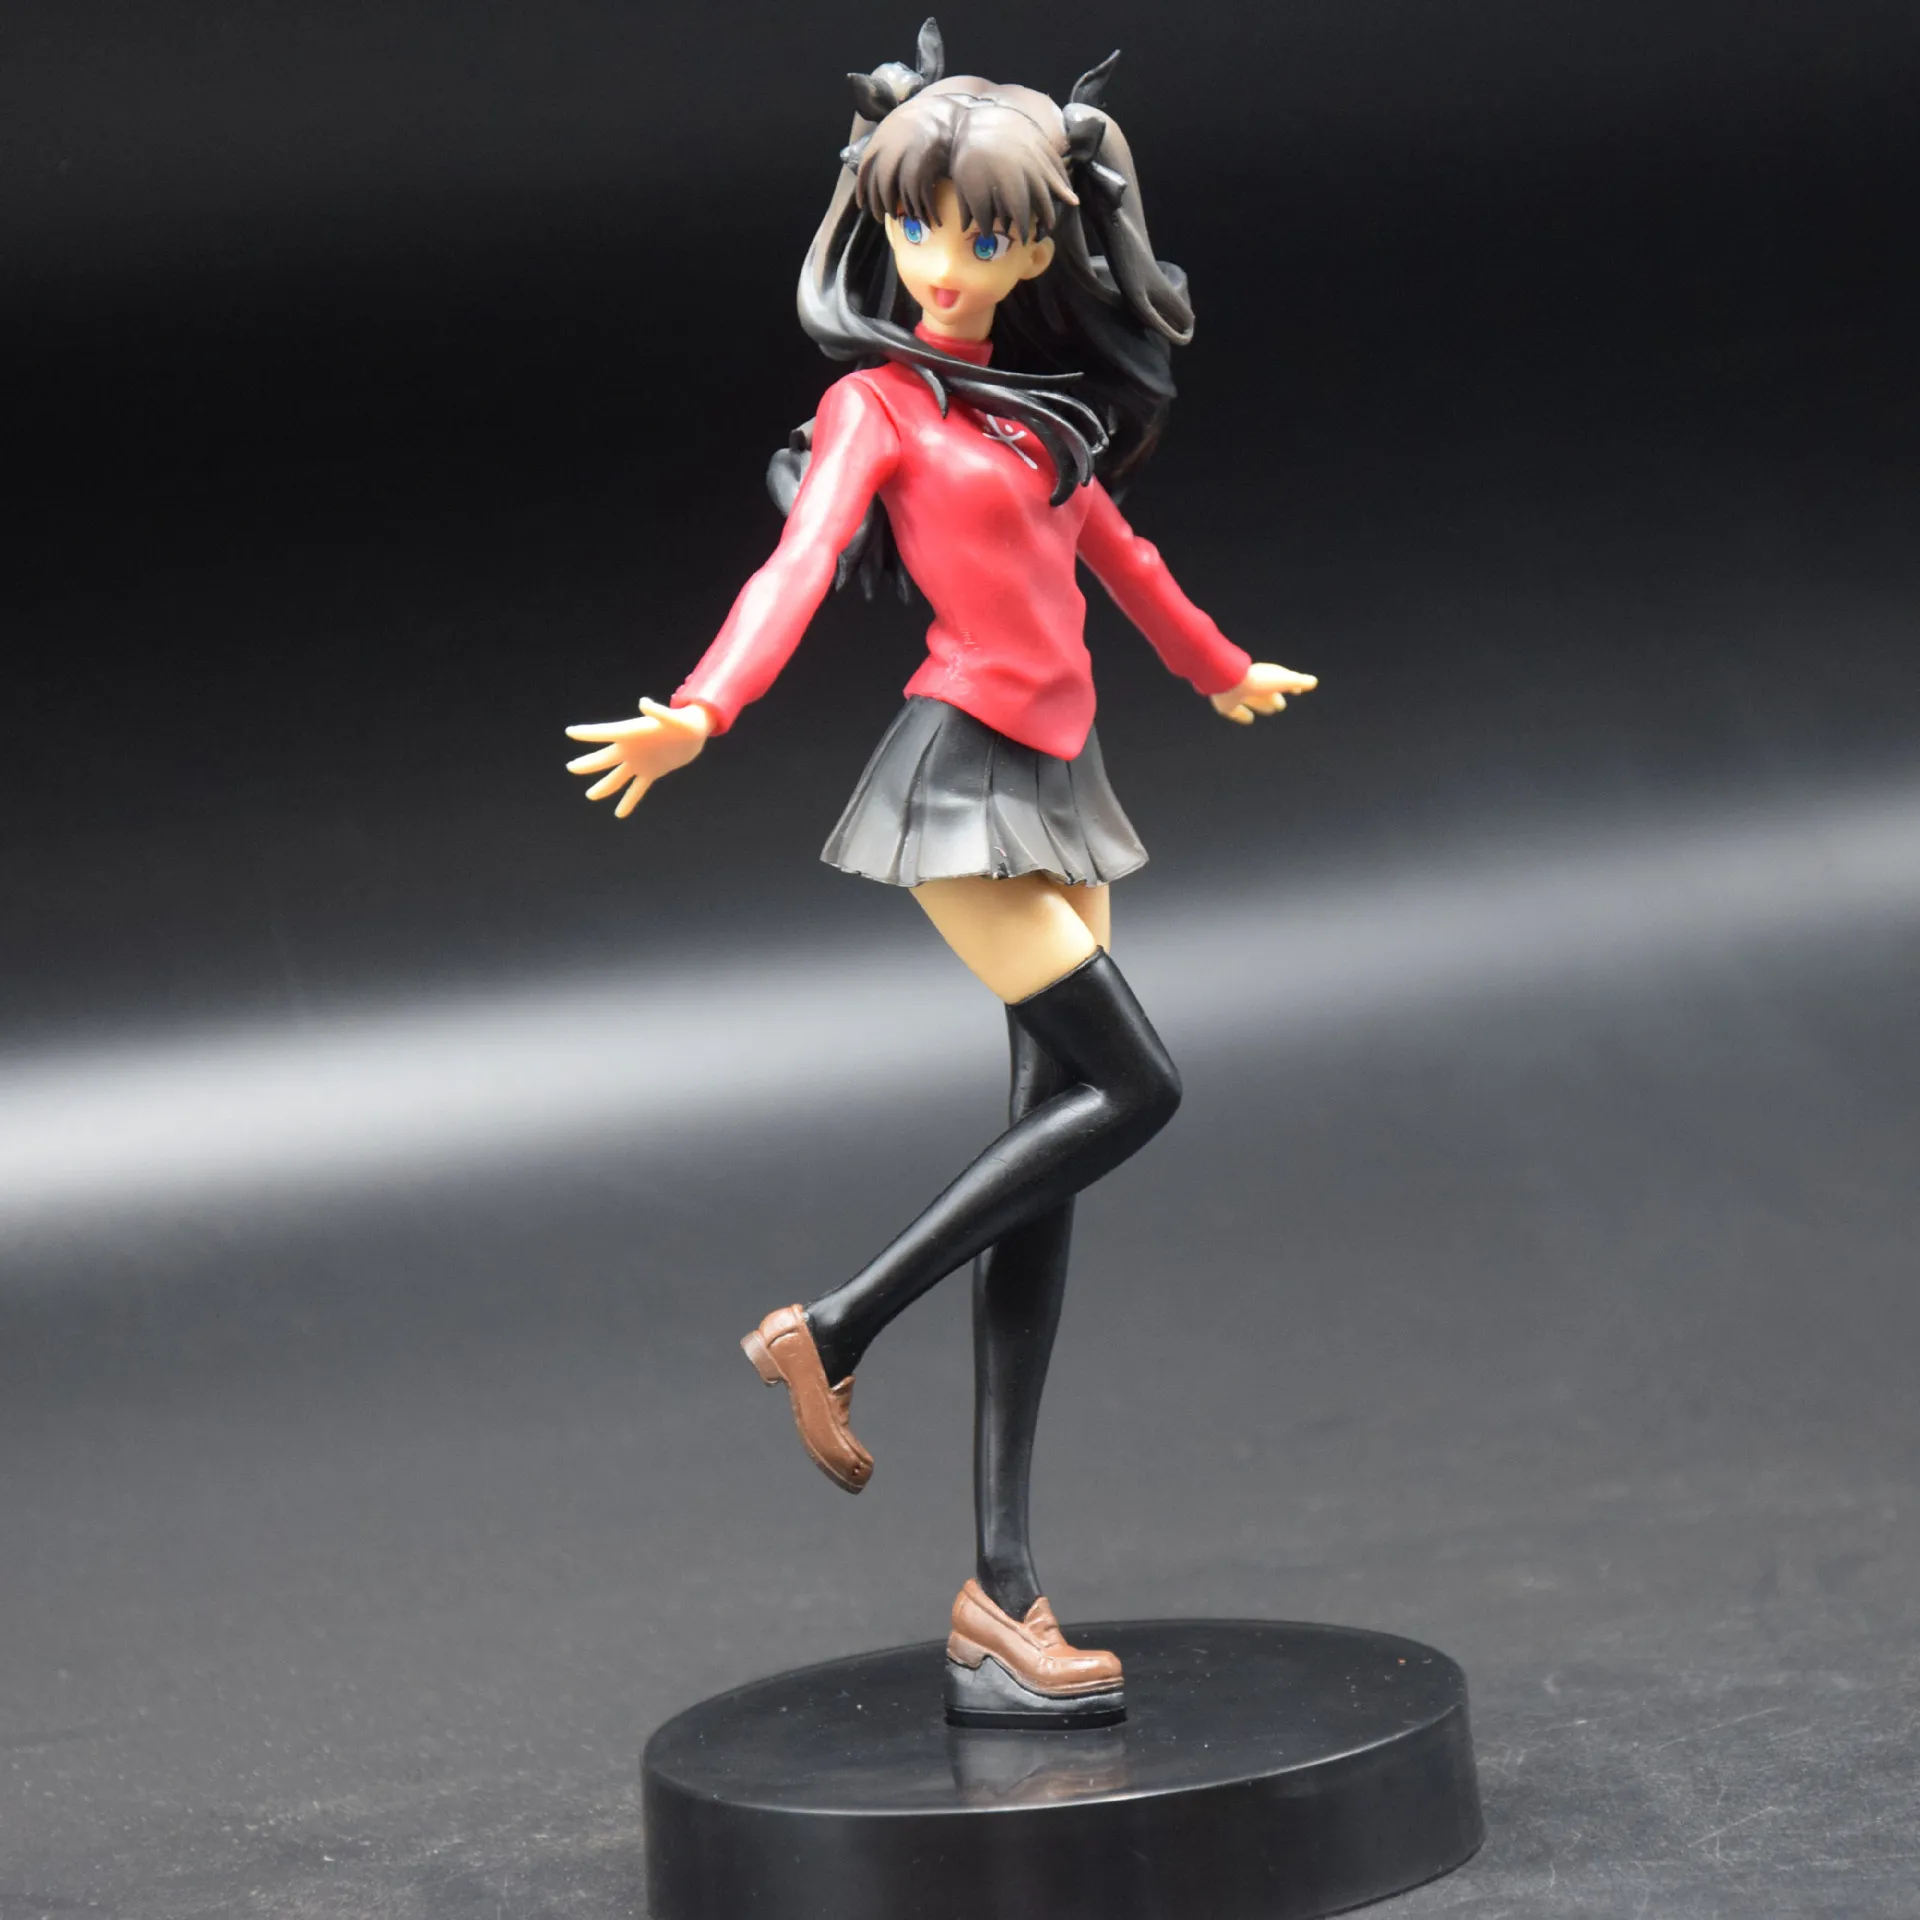 

18CM Anime Fate/Stay Night Red Devil Tohsaka Rin Characters Figure Toys Sexy Model Dolls Toy Girls Gift